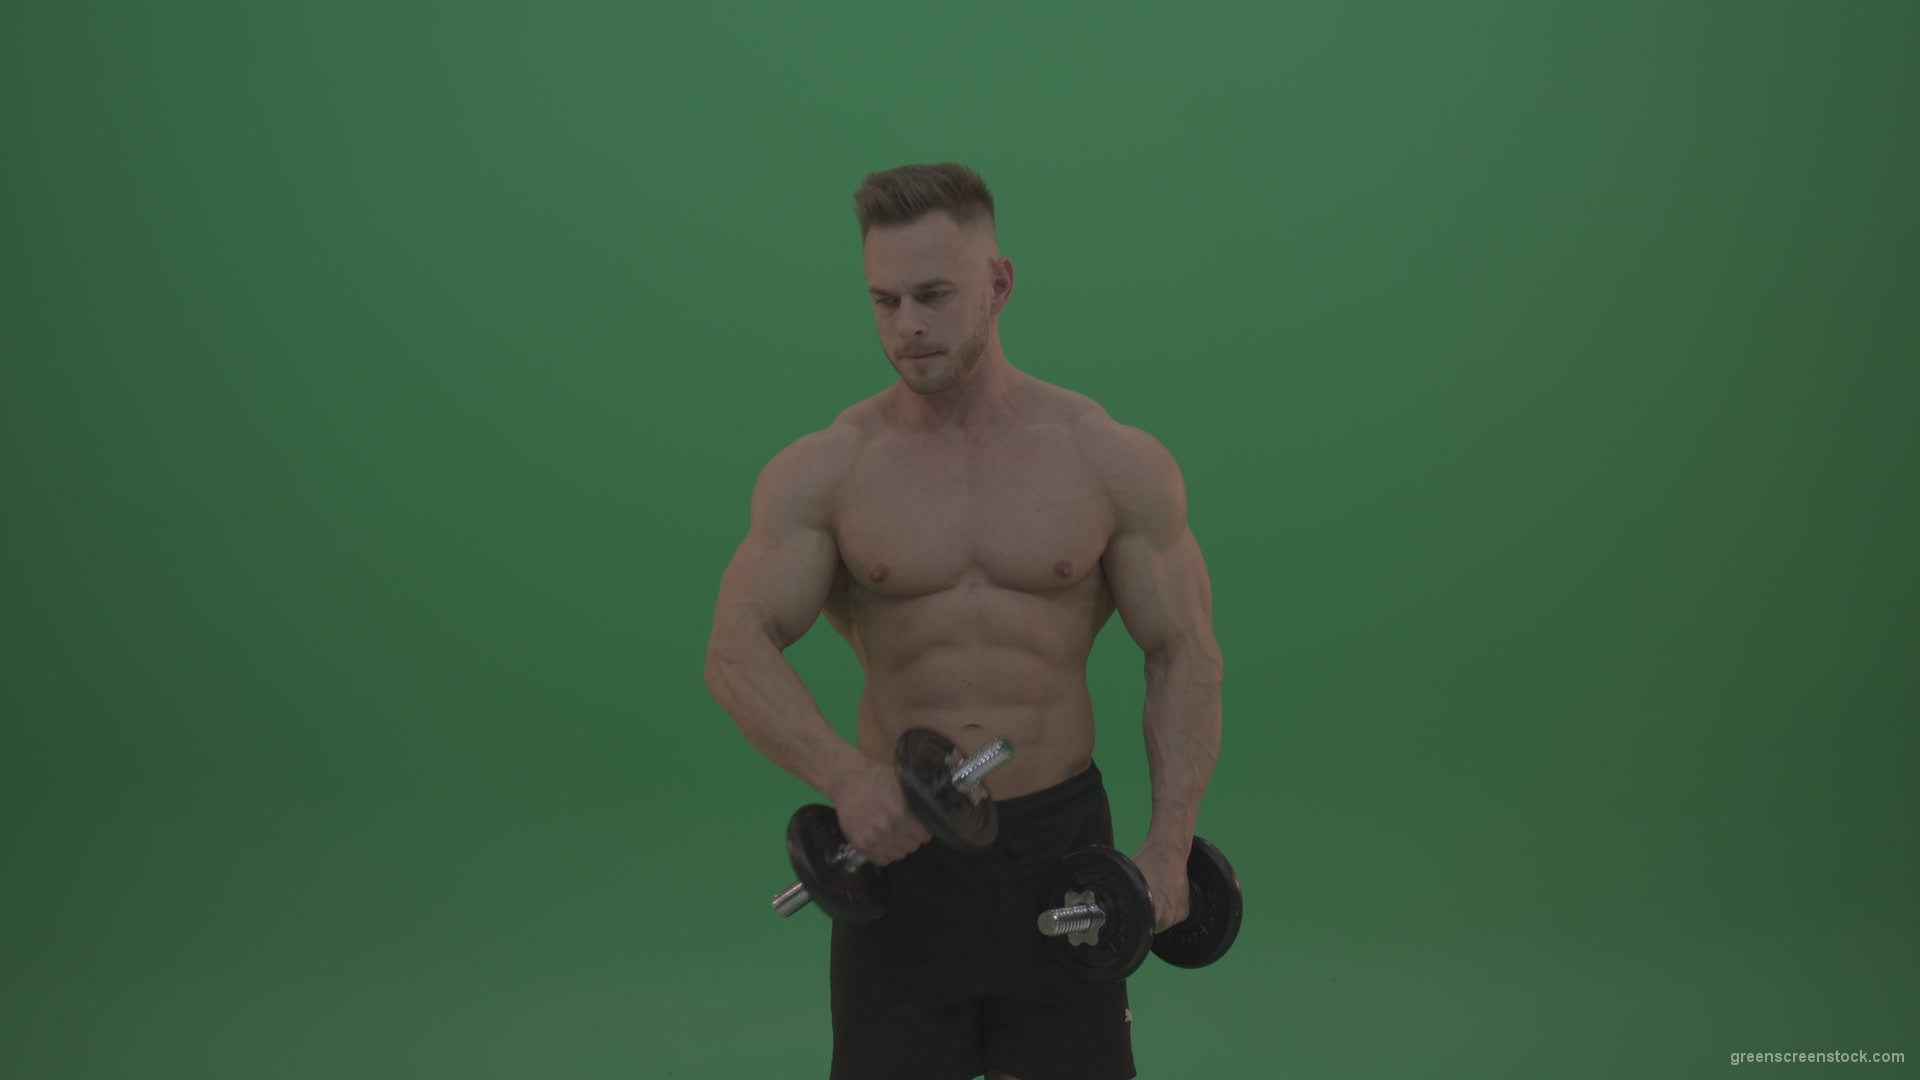 Young_Bodybuilder_Working_Out_With_Two_Handed_Dumbbell_Biceps_Exercises_On_Green_Screen_Wall_Background_006 Green Screen Stock